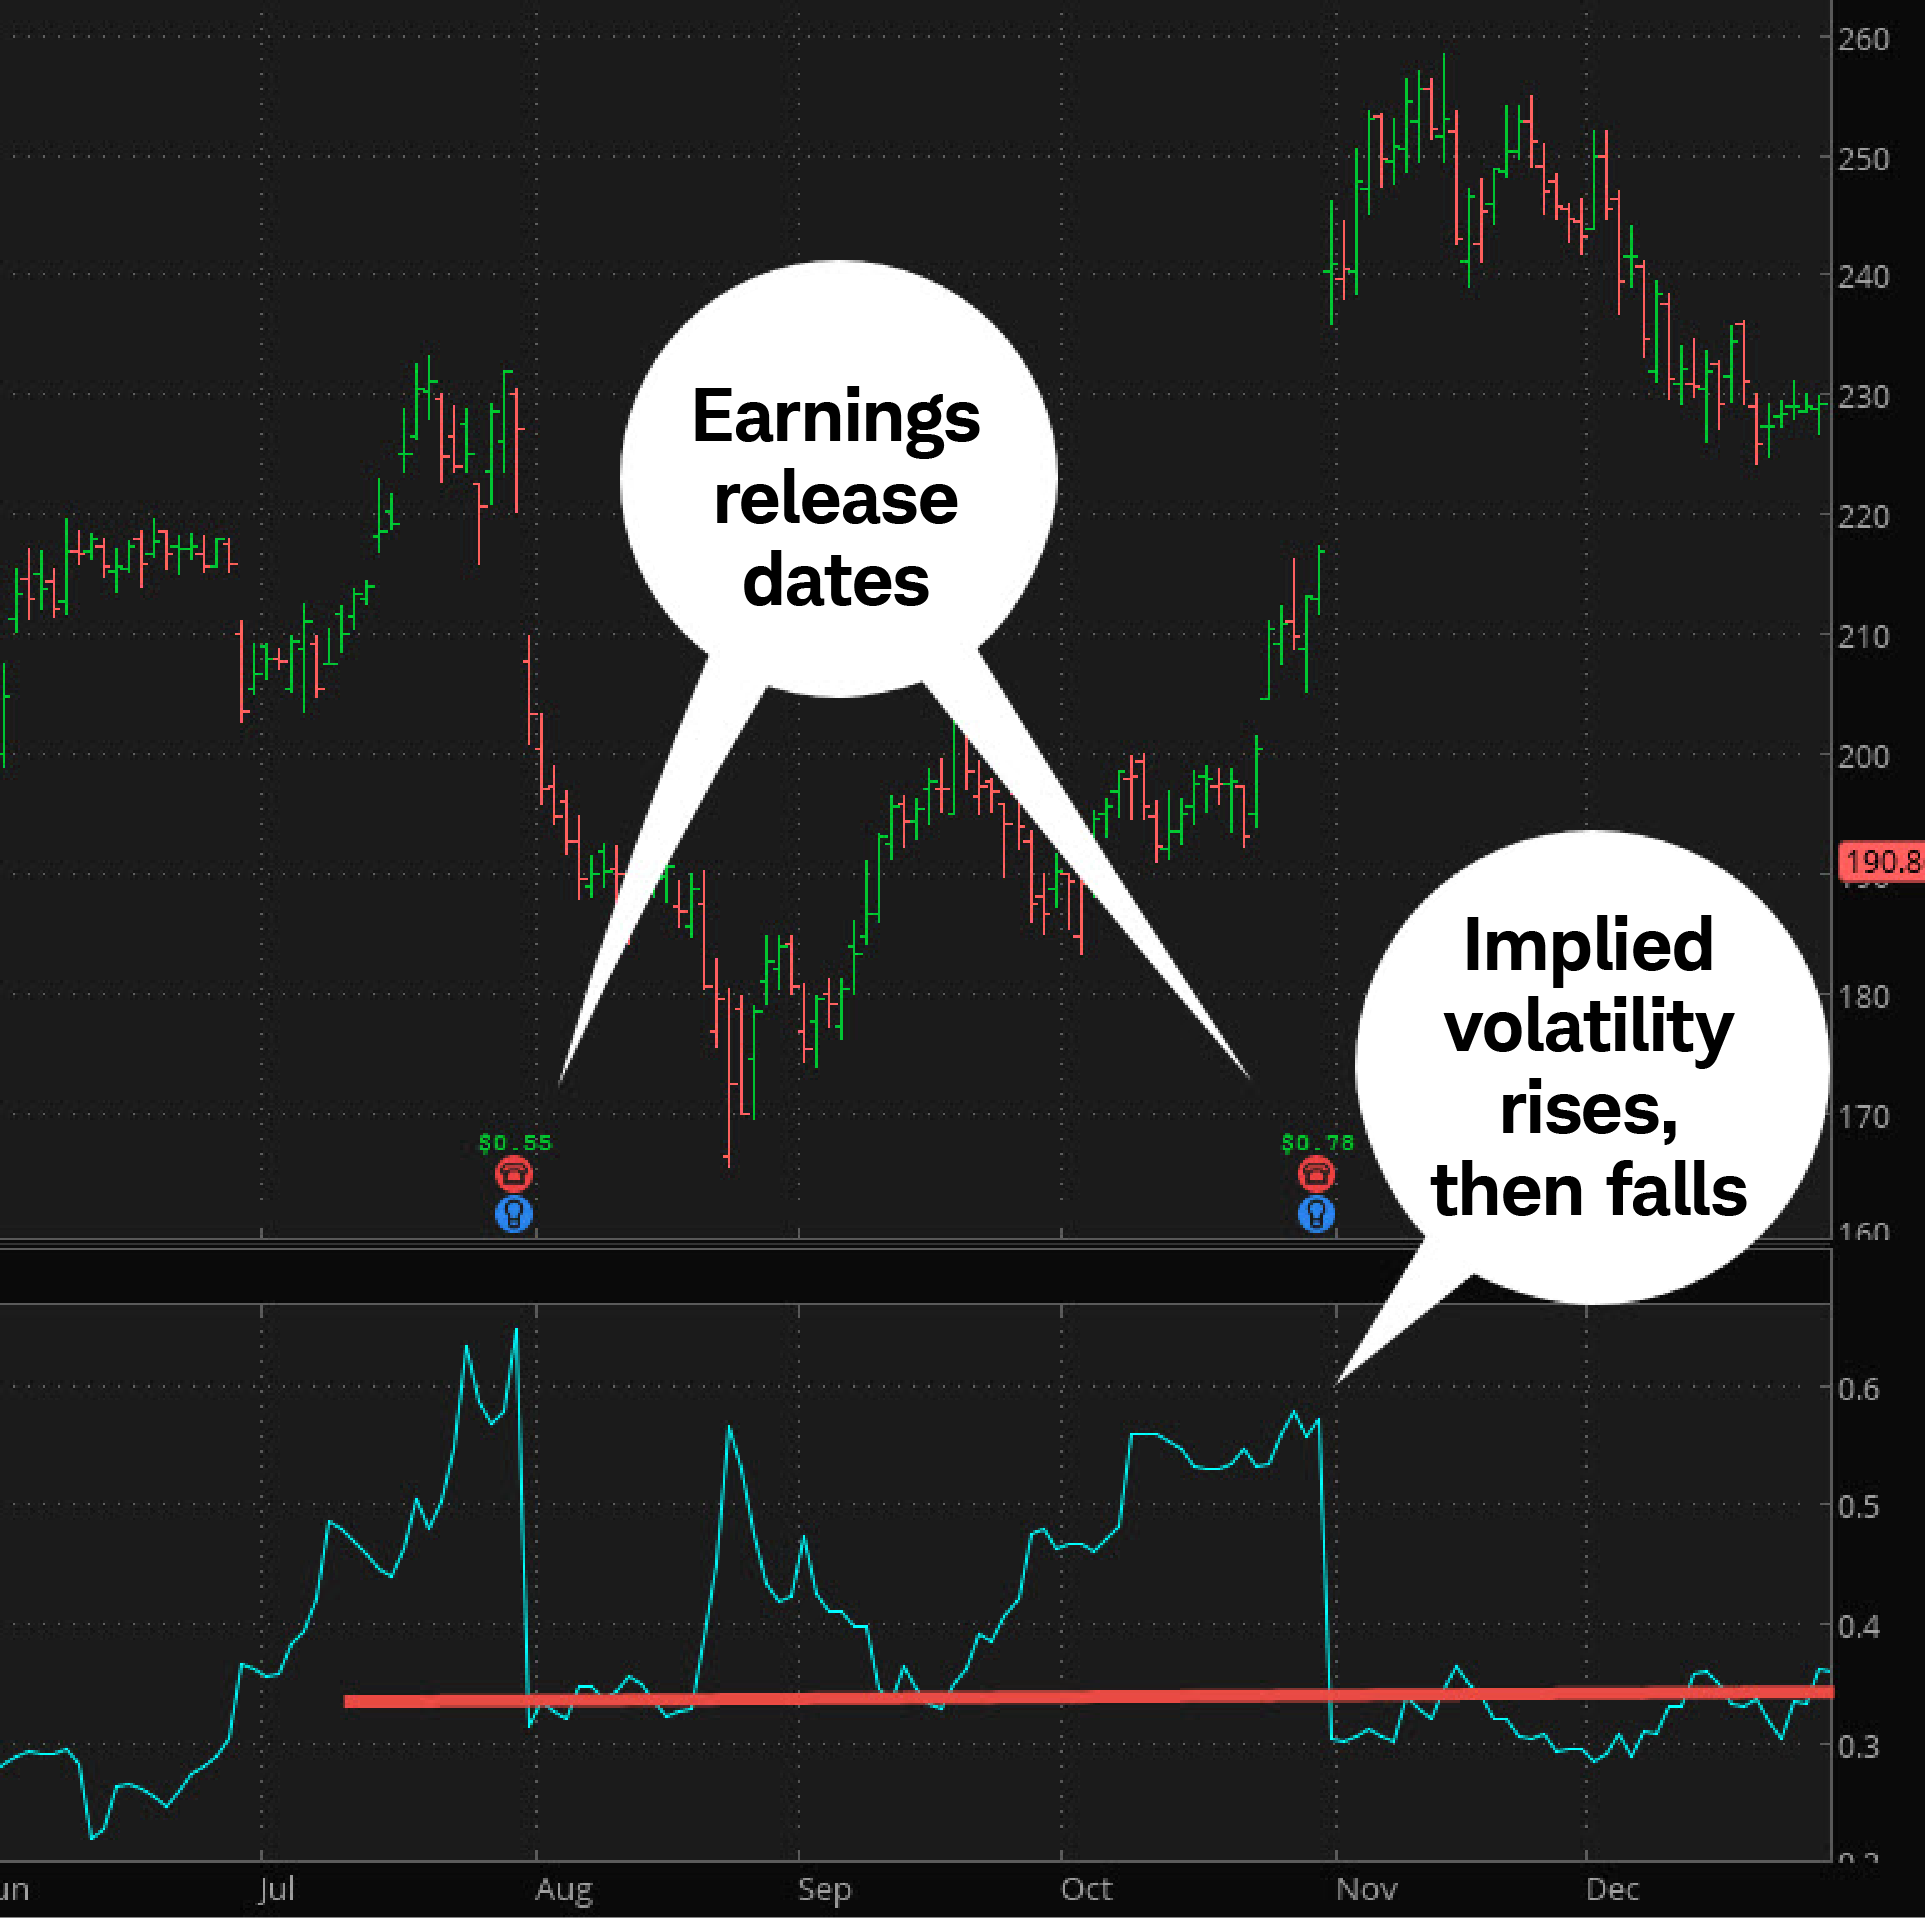 The implied volatility indicator on thinkorswim shows an example of how volatility tends to rise ahead of a company's earnings announcement and often falls shortly after the event.